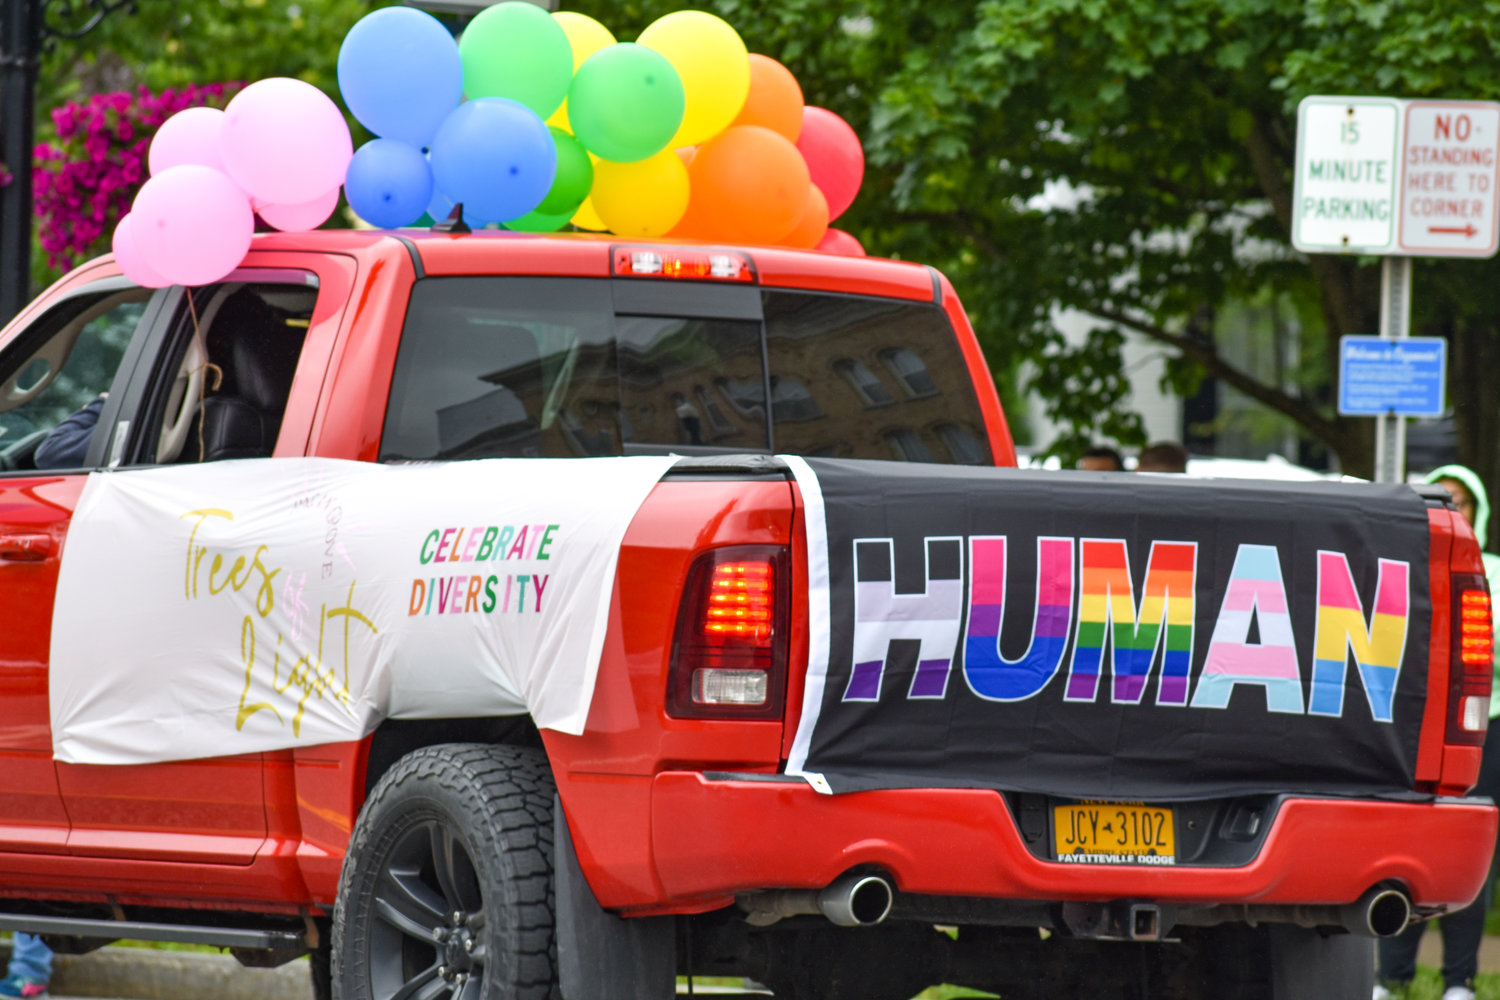 This pickup truck was decked out in banners and balloons for the pride parade hosted in Cazenovia on Saturday.